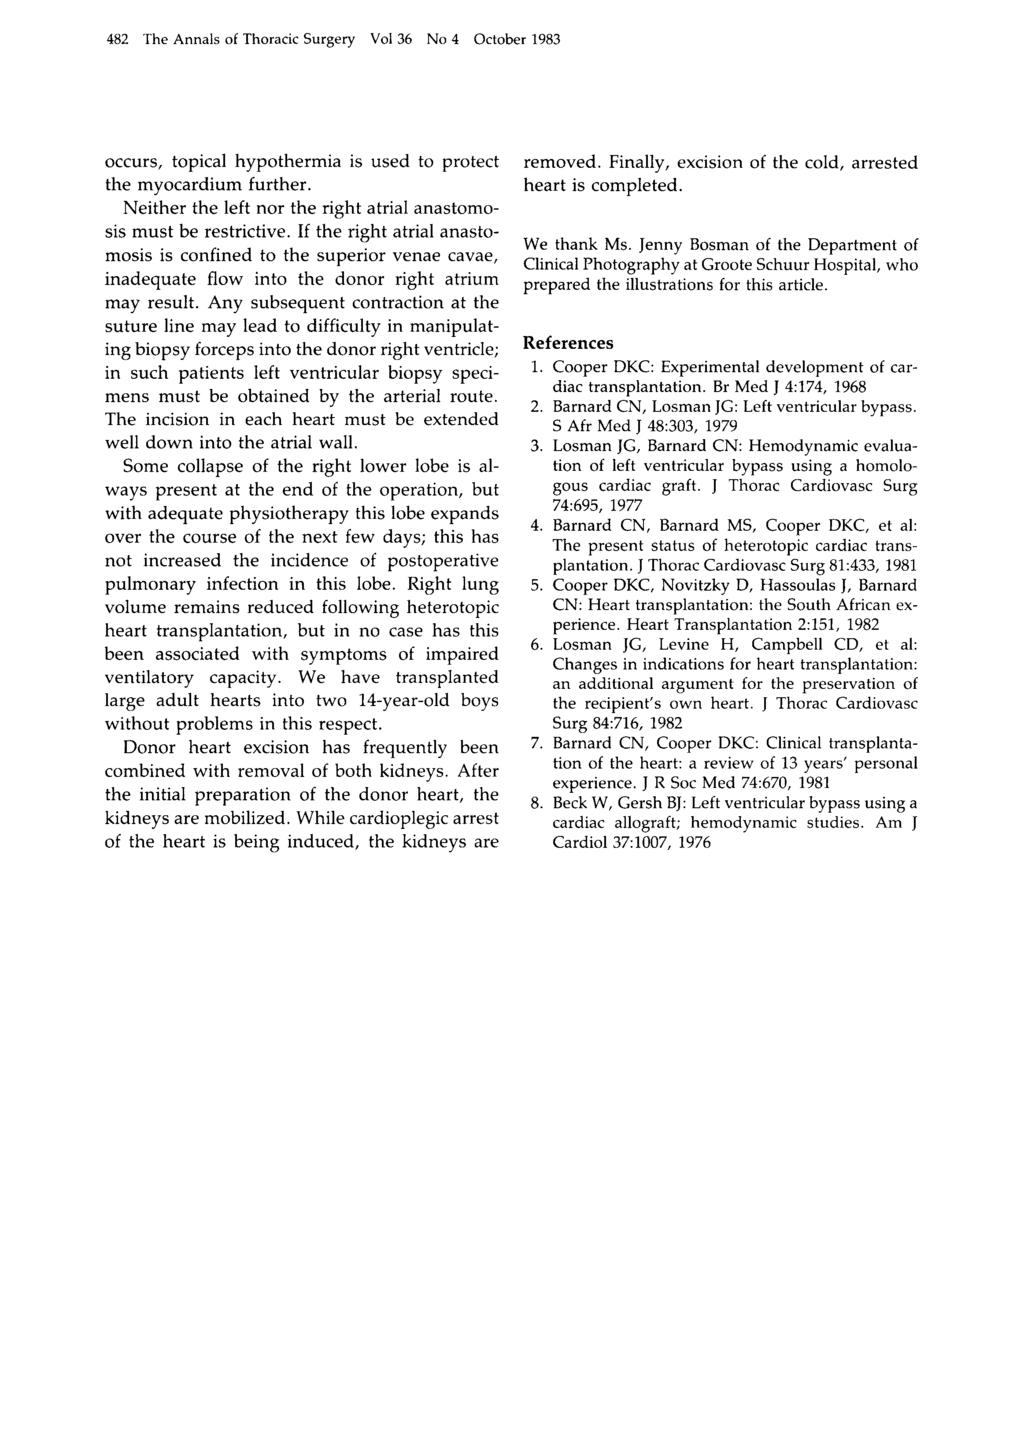 482 The Annals of Thoracic Surgery Vol36 No 4 October 1983 occurs, topical hypothermia is used to protect the myocardium further. Neither the left nor the right atrial anastomosis must be restrictive.